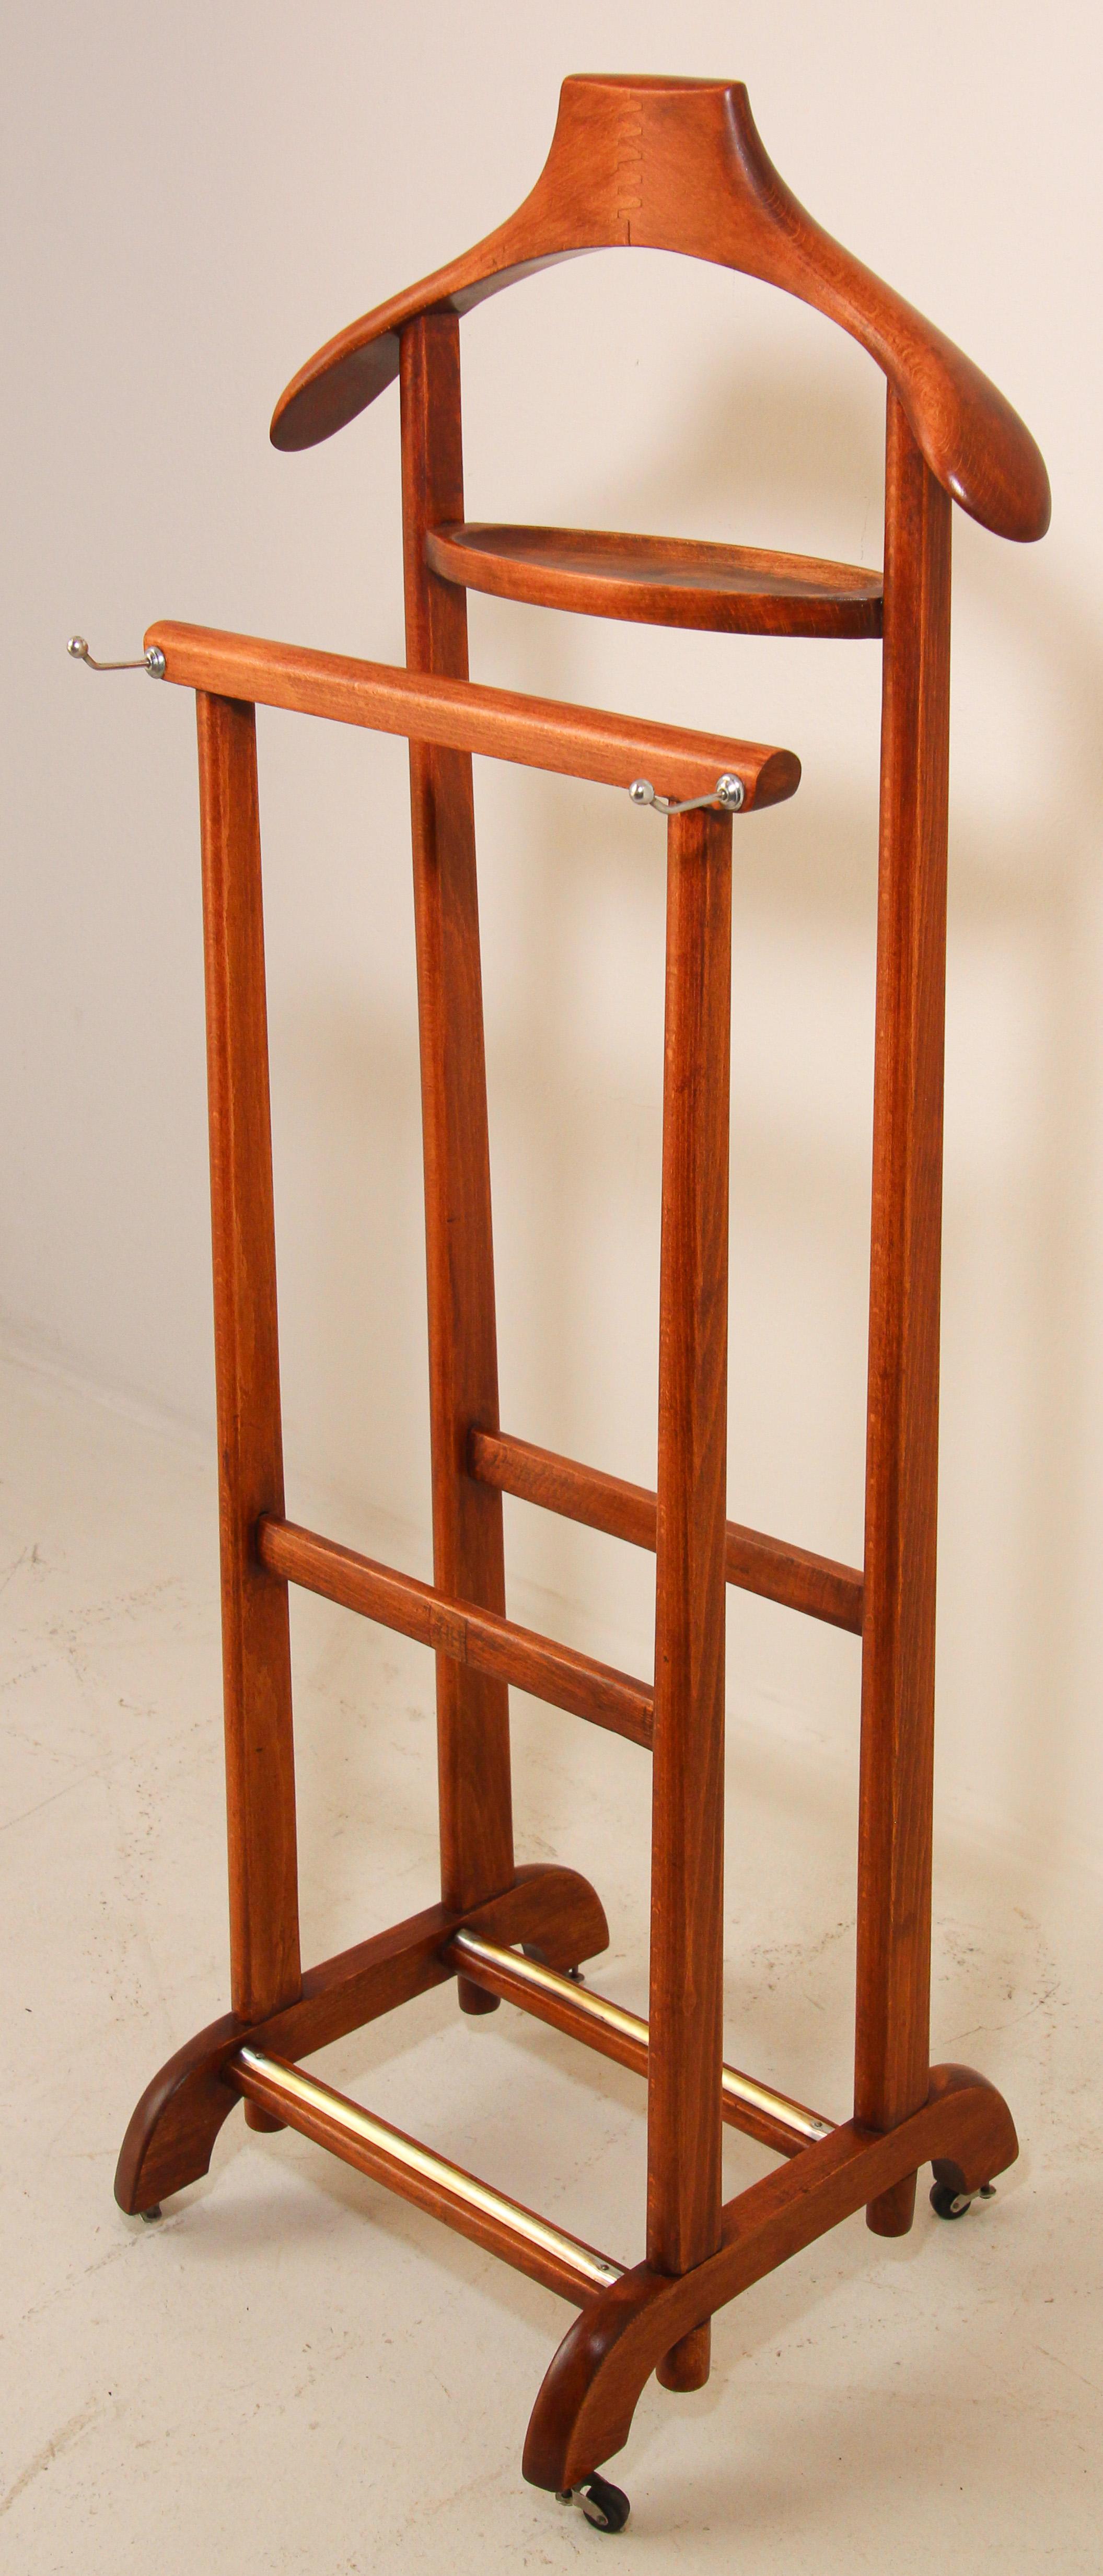 Gentleman's Double Stand Valet by Ico Parisi for Fratelli Reguitti, 1960s.
Beechwood gentleman's valet clothing stand with catch all tray change or cufflink holder and metal hooks for your neckties and belts.
There is a double rack with brass on